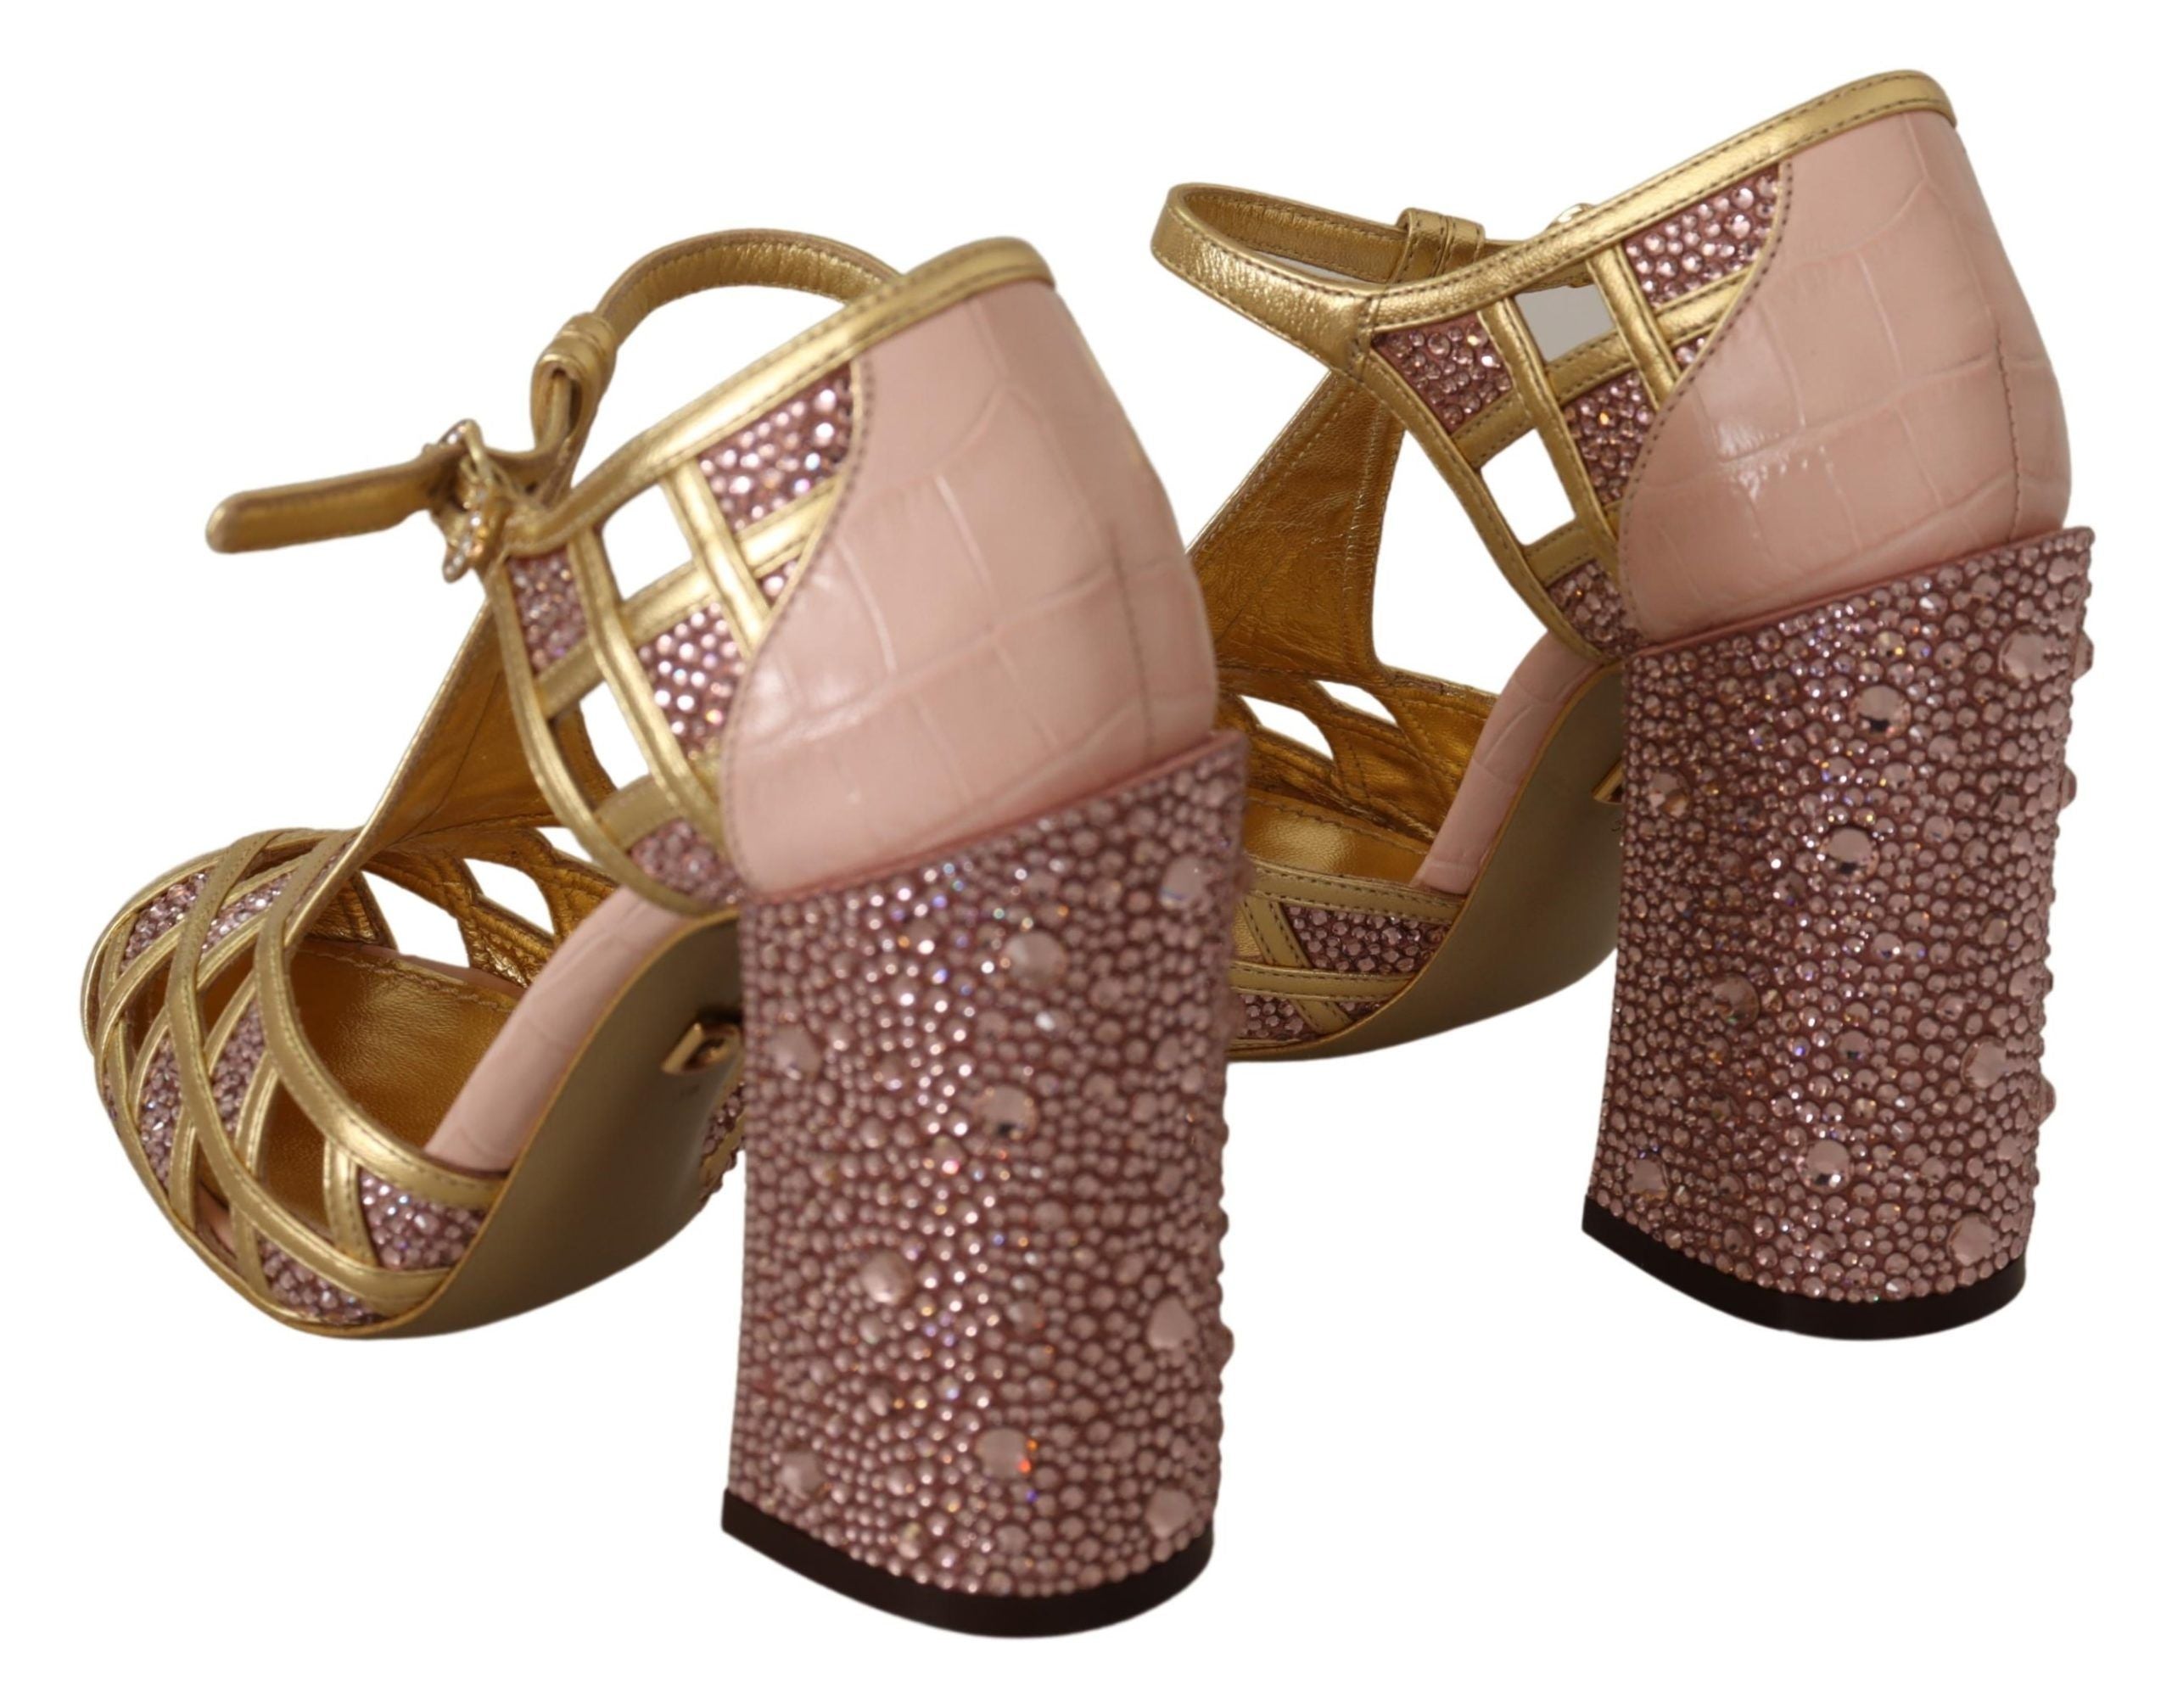 Dolce & Gabbana Pink Gold Leather Crystal Pumps T-strap Shoes GENUINE AUTHENTIC BRAND LLC